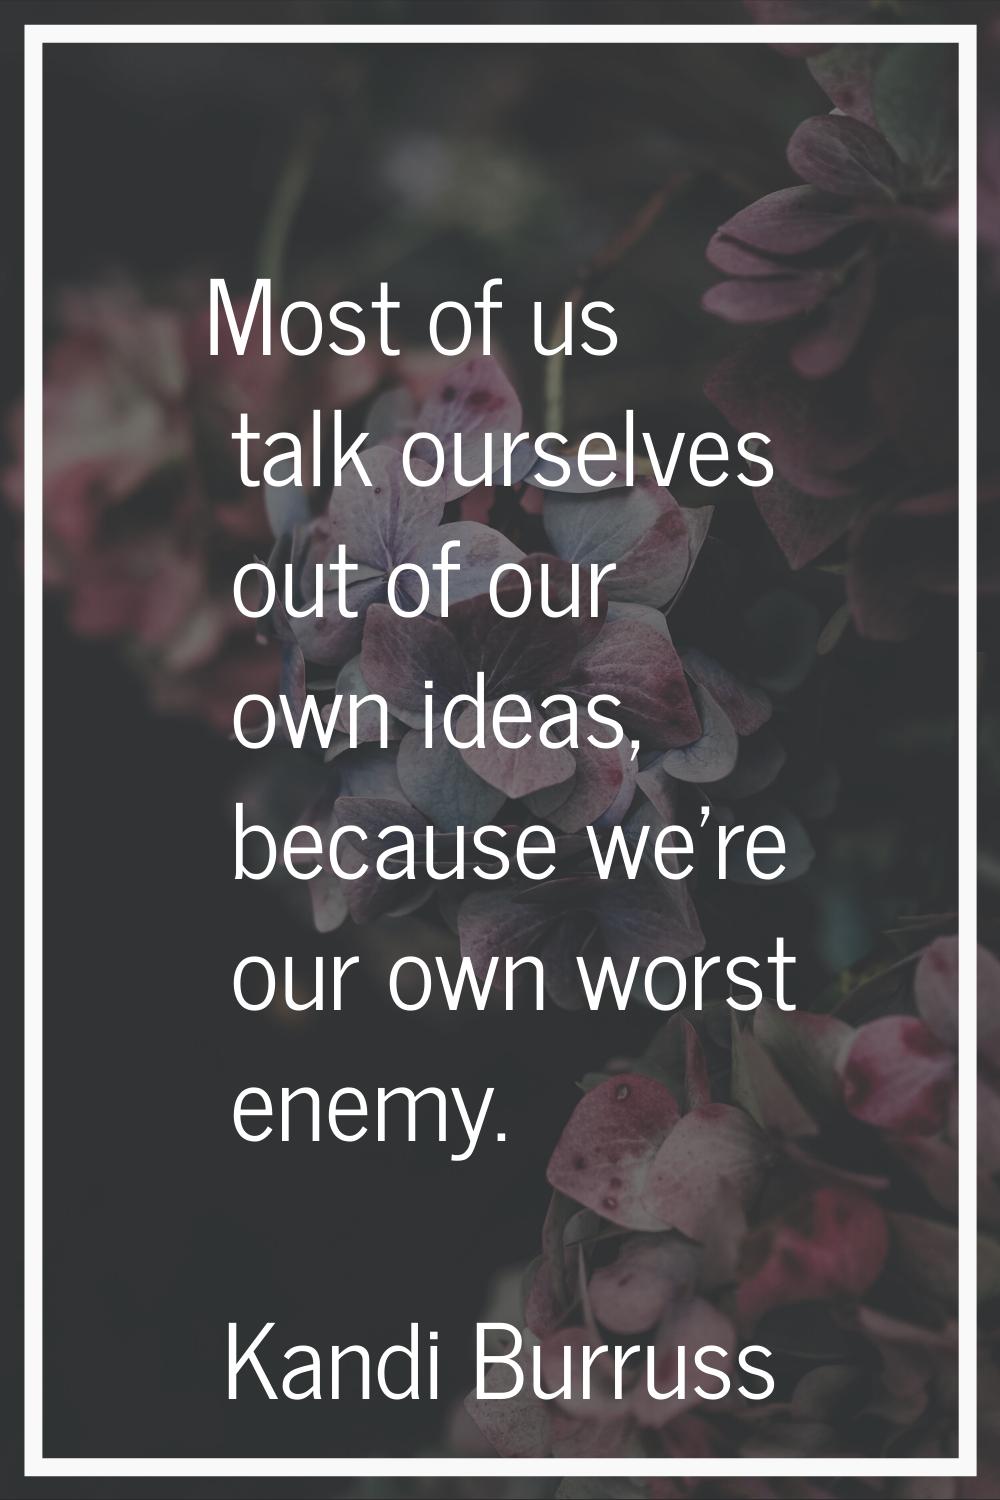 Most of us talk ourselves out of our own ideas, because we're our own worst enemy.